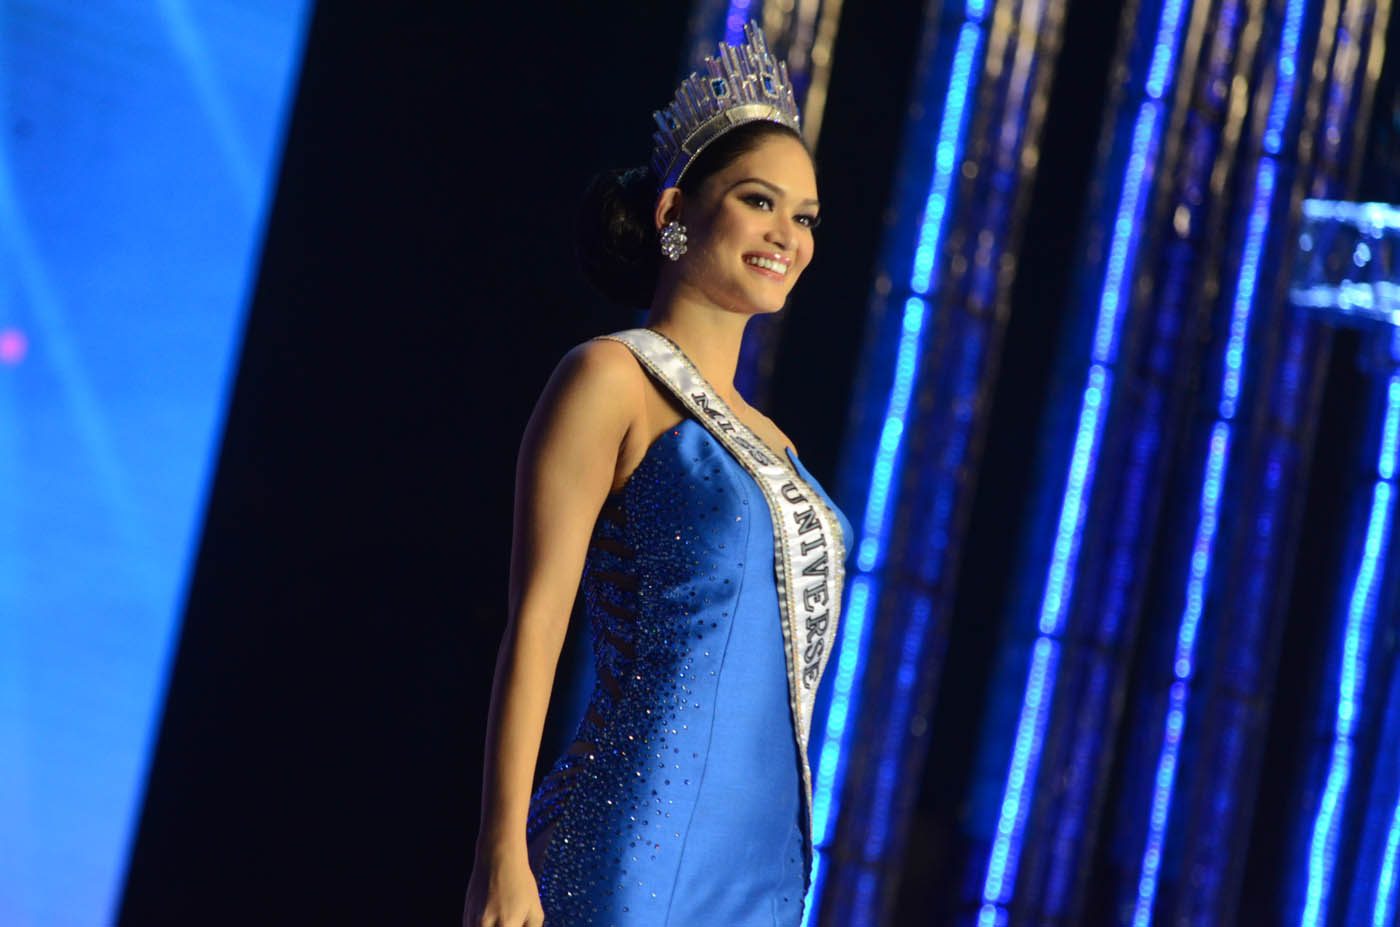 PH eyed to host Miss Universe in 2017